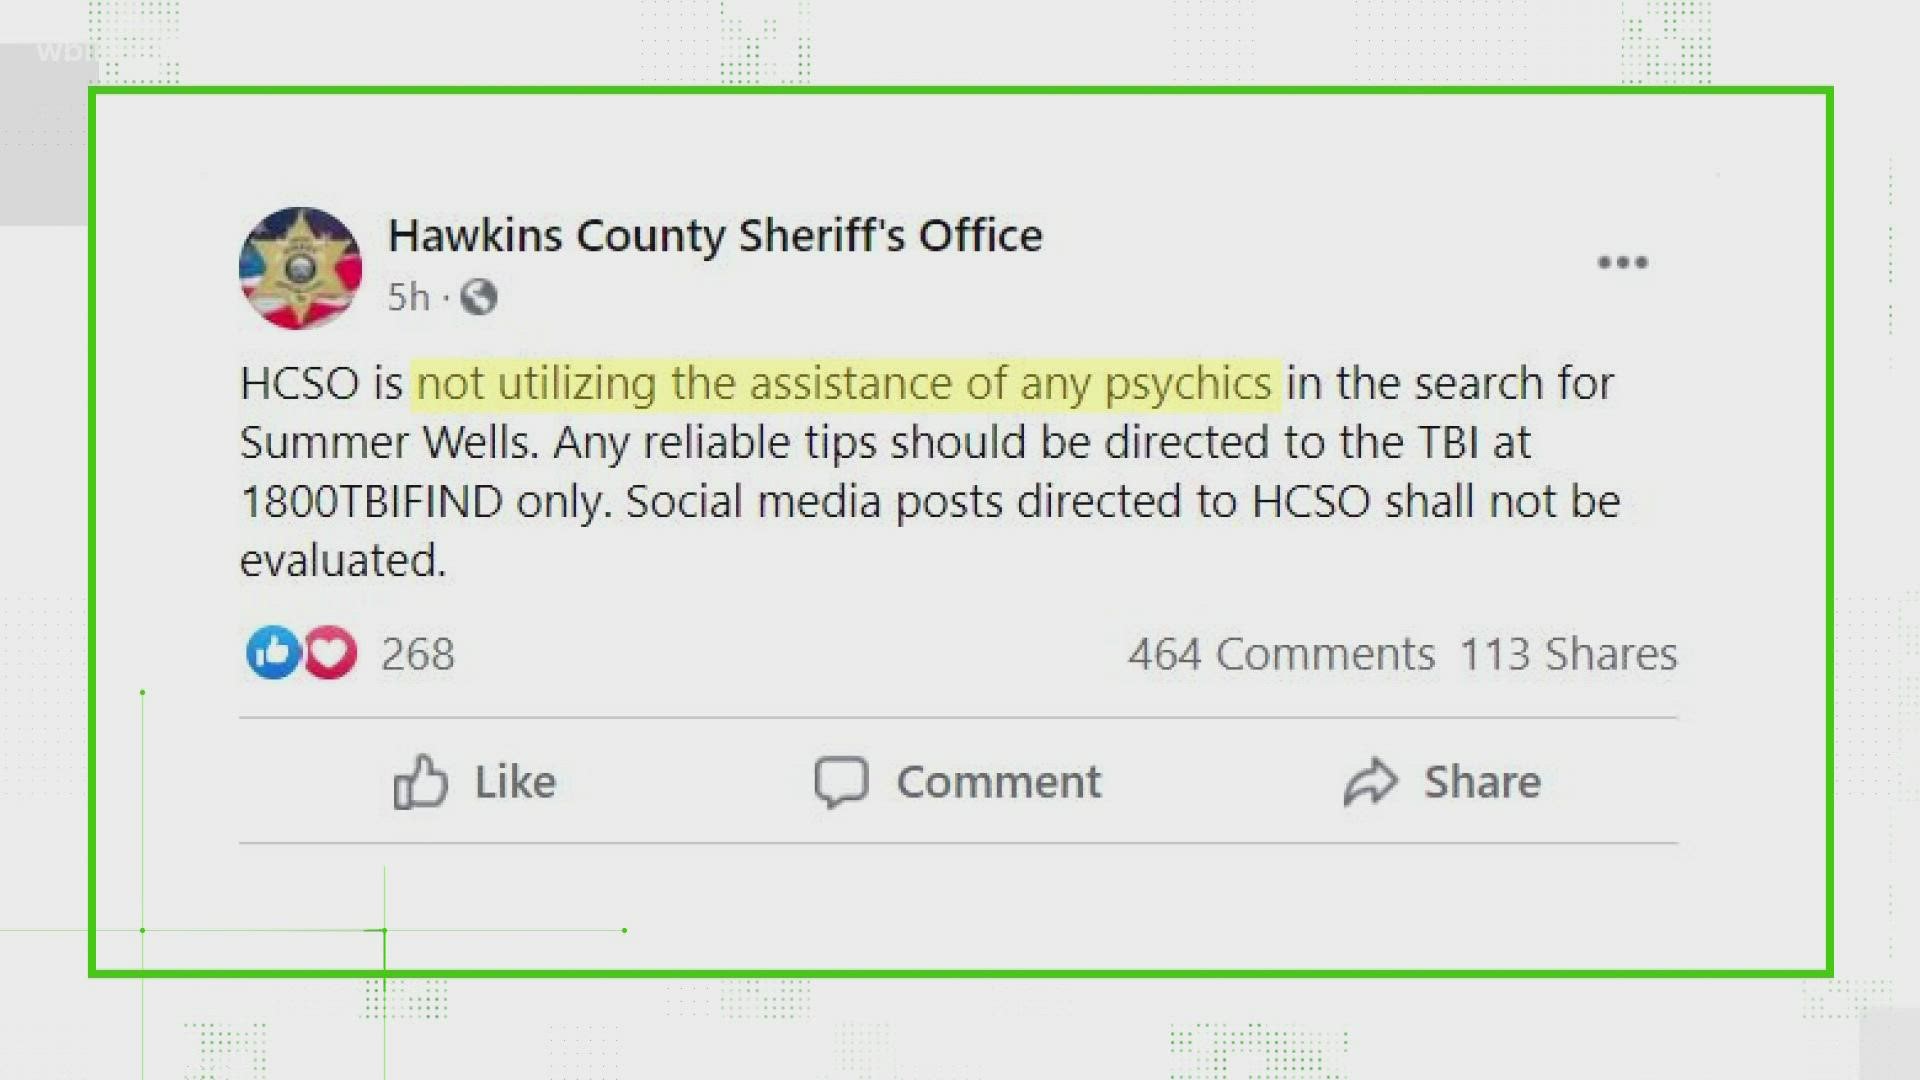 The Hawkins County Sheriff's Office confirms they are not using psychics in their search, and they are looking for reliable tips.